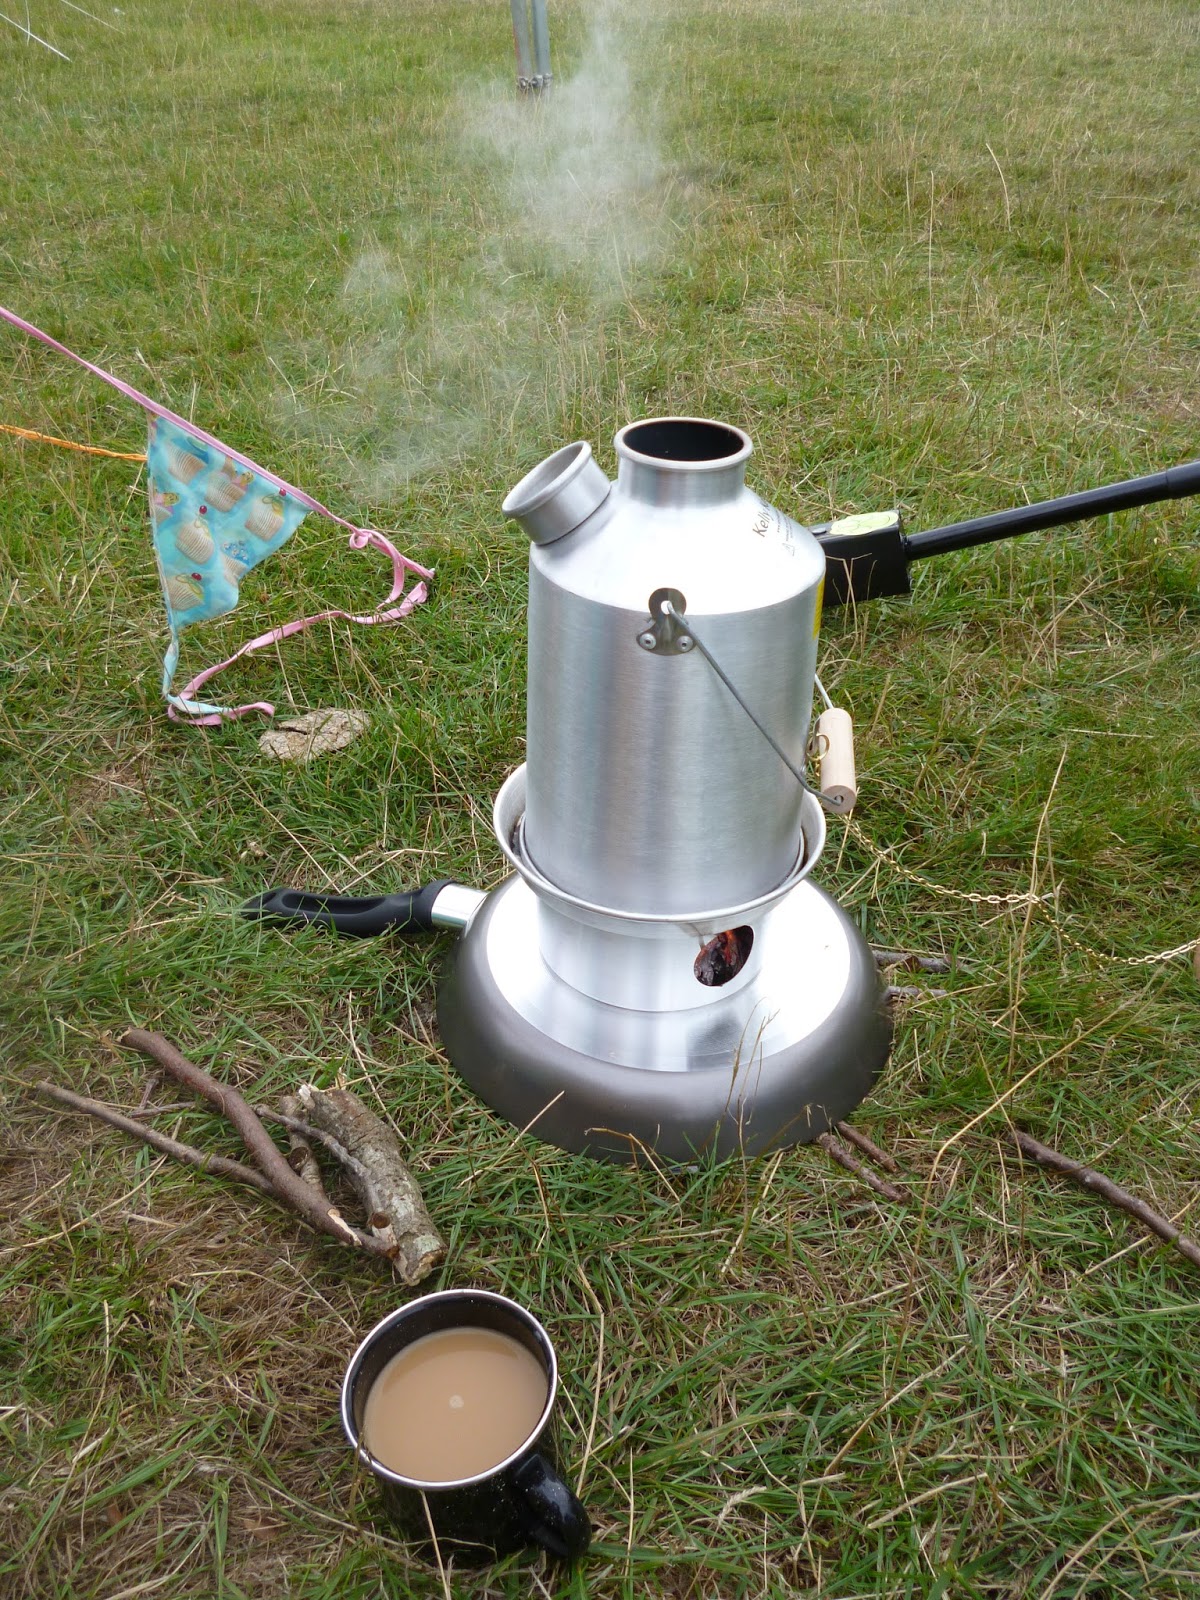 Kelly kettle storm kettle cup of tea camping